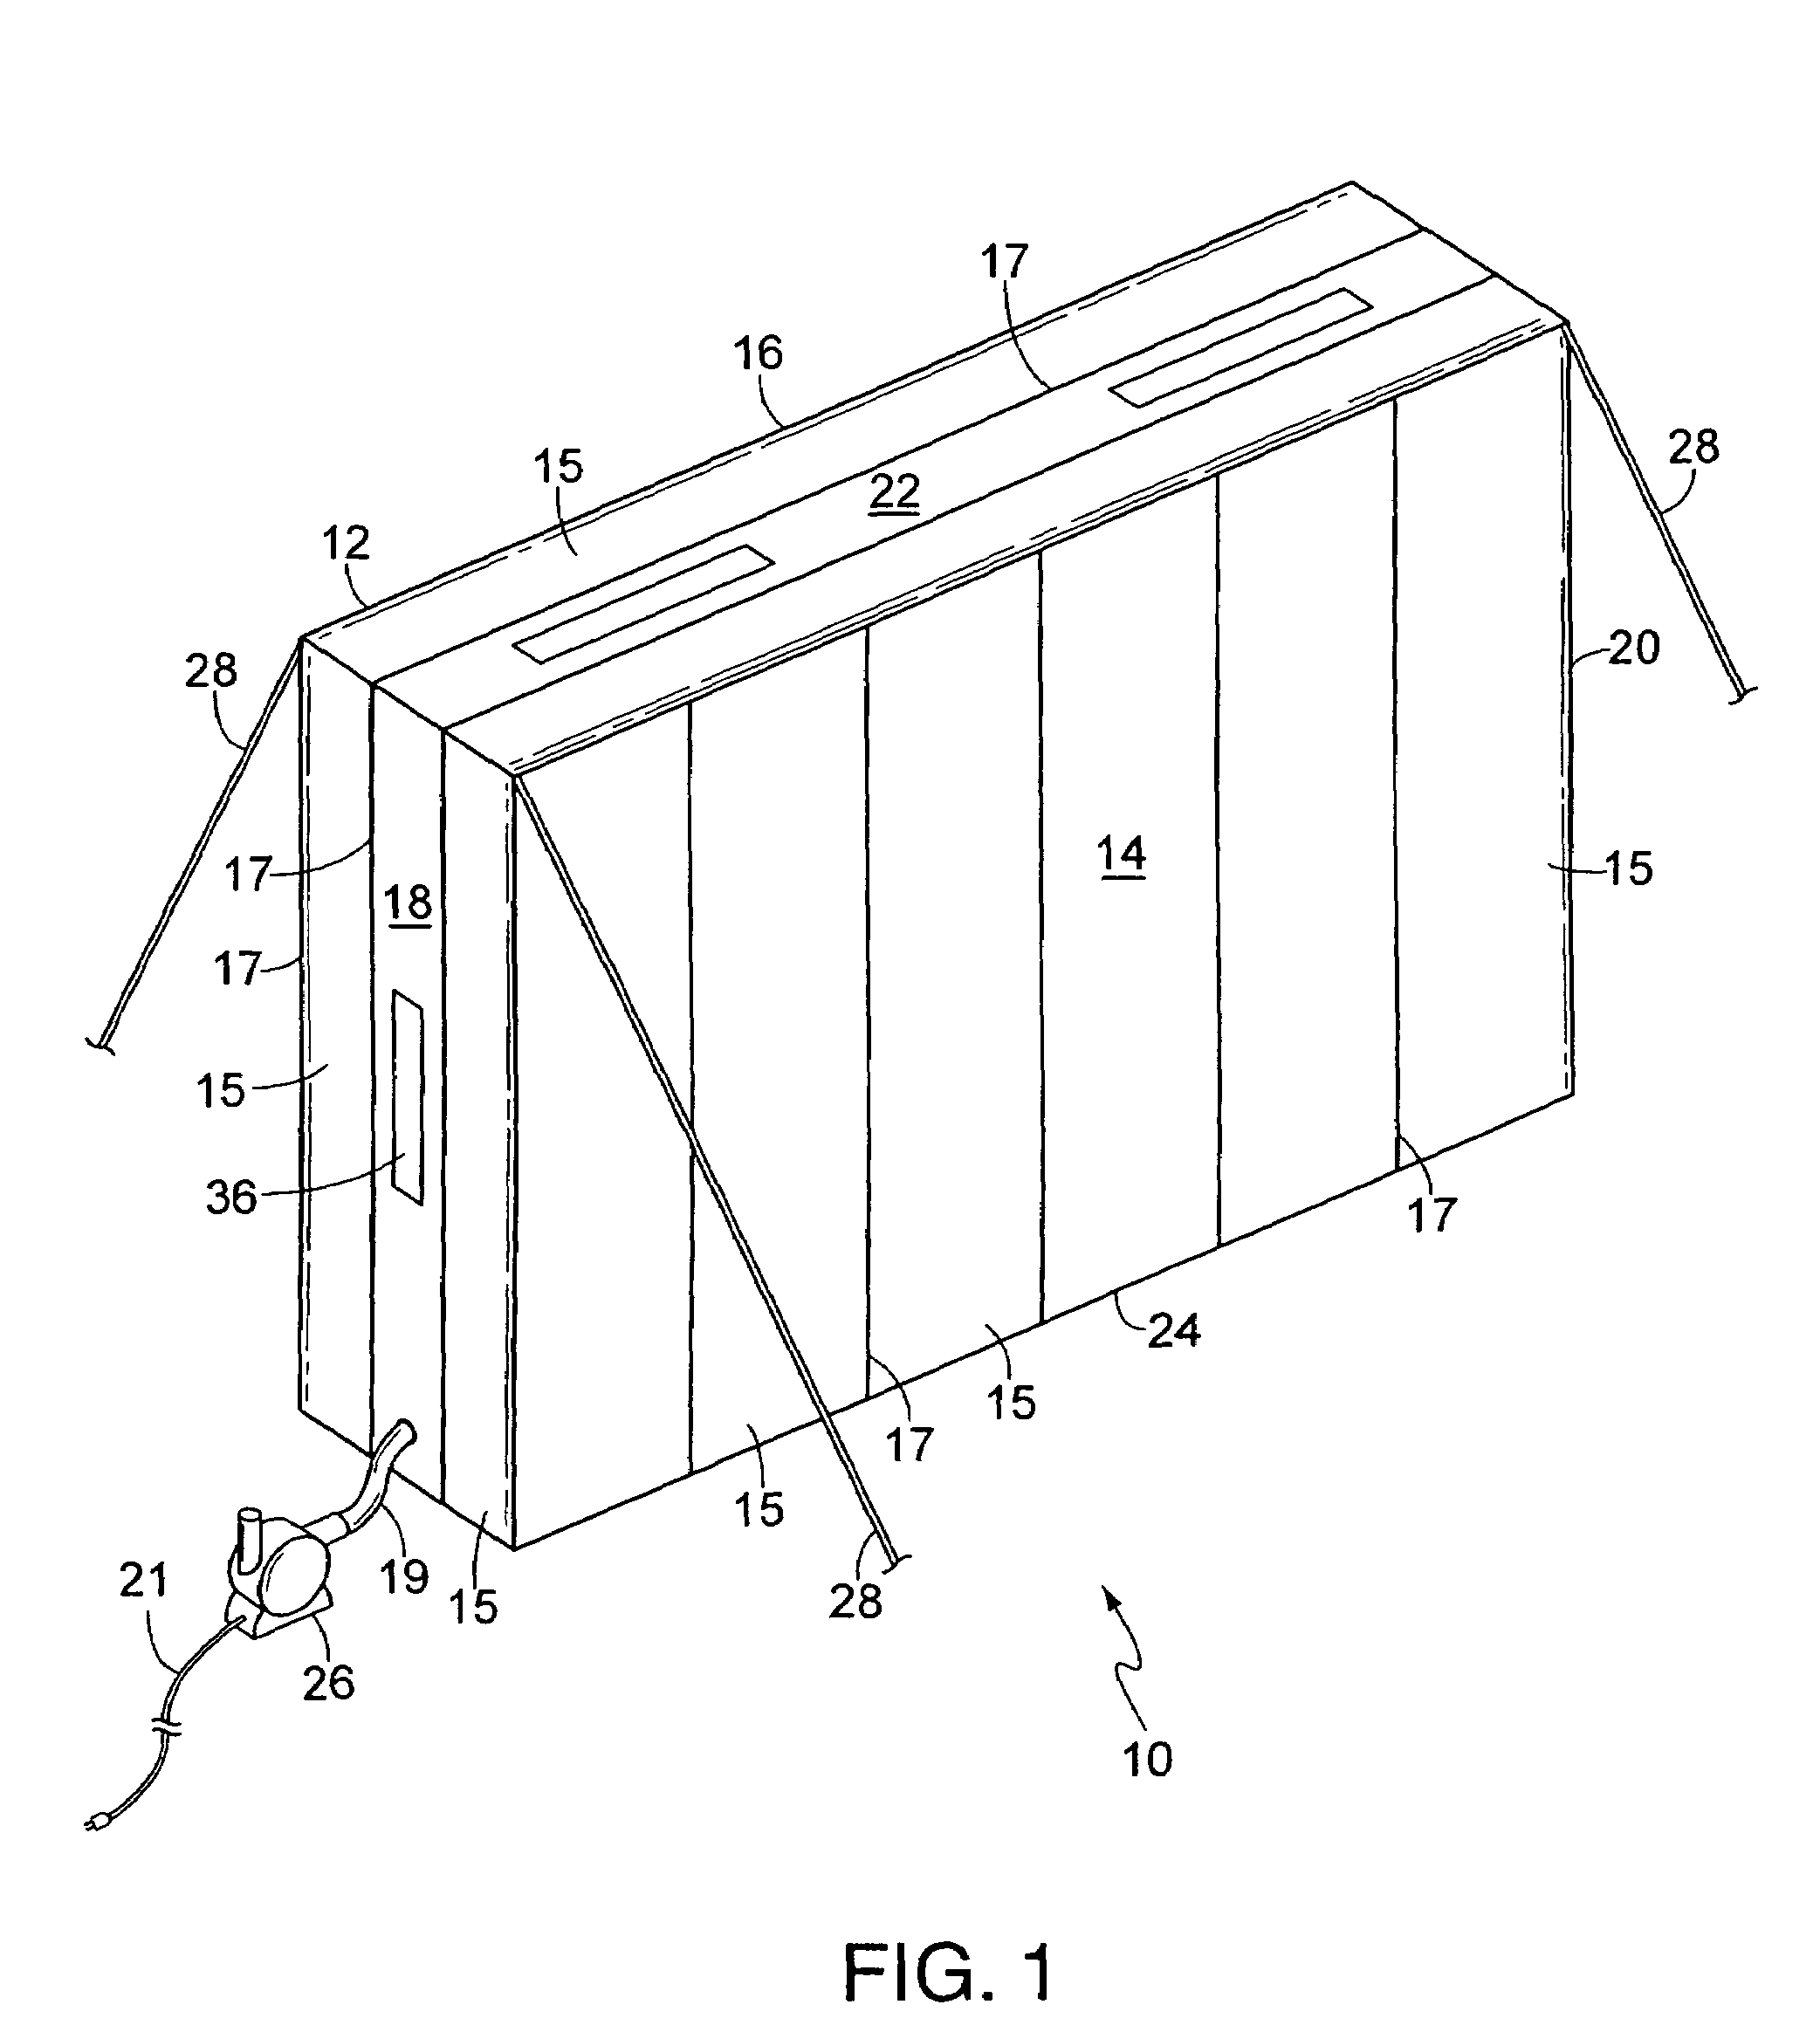 Inflatable projection/imaging screen structure